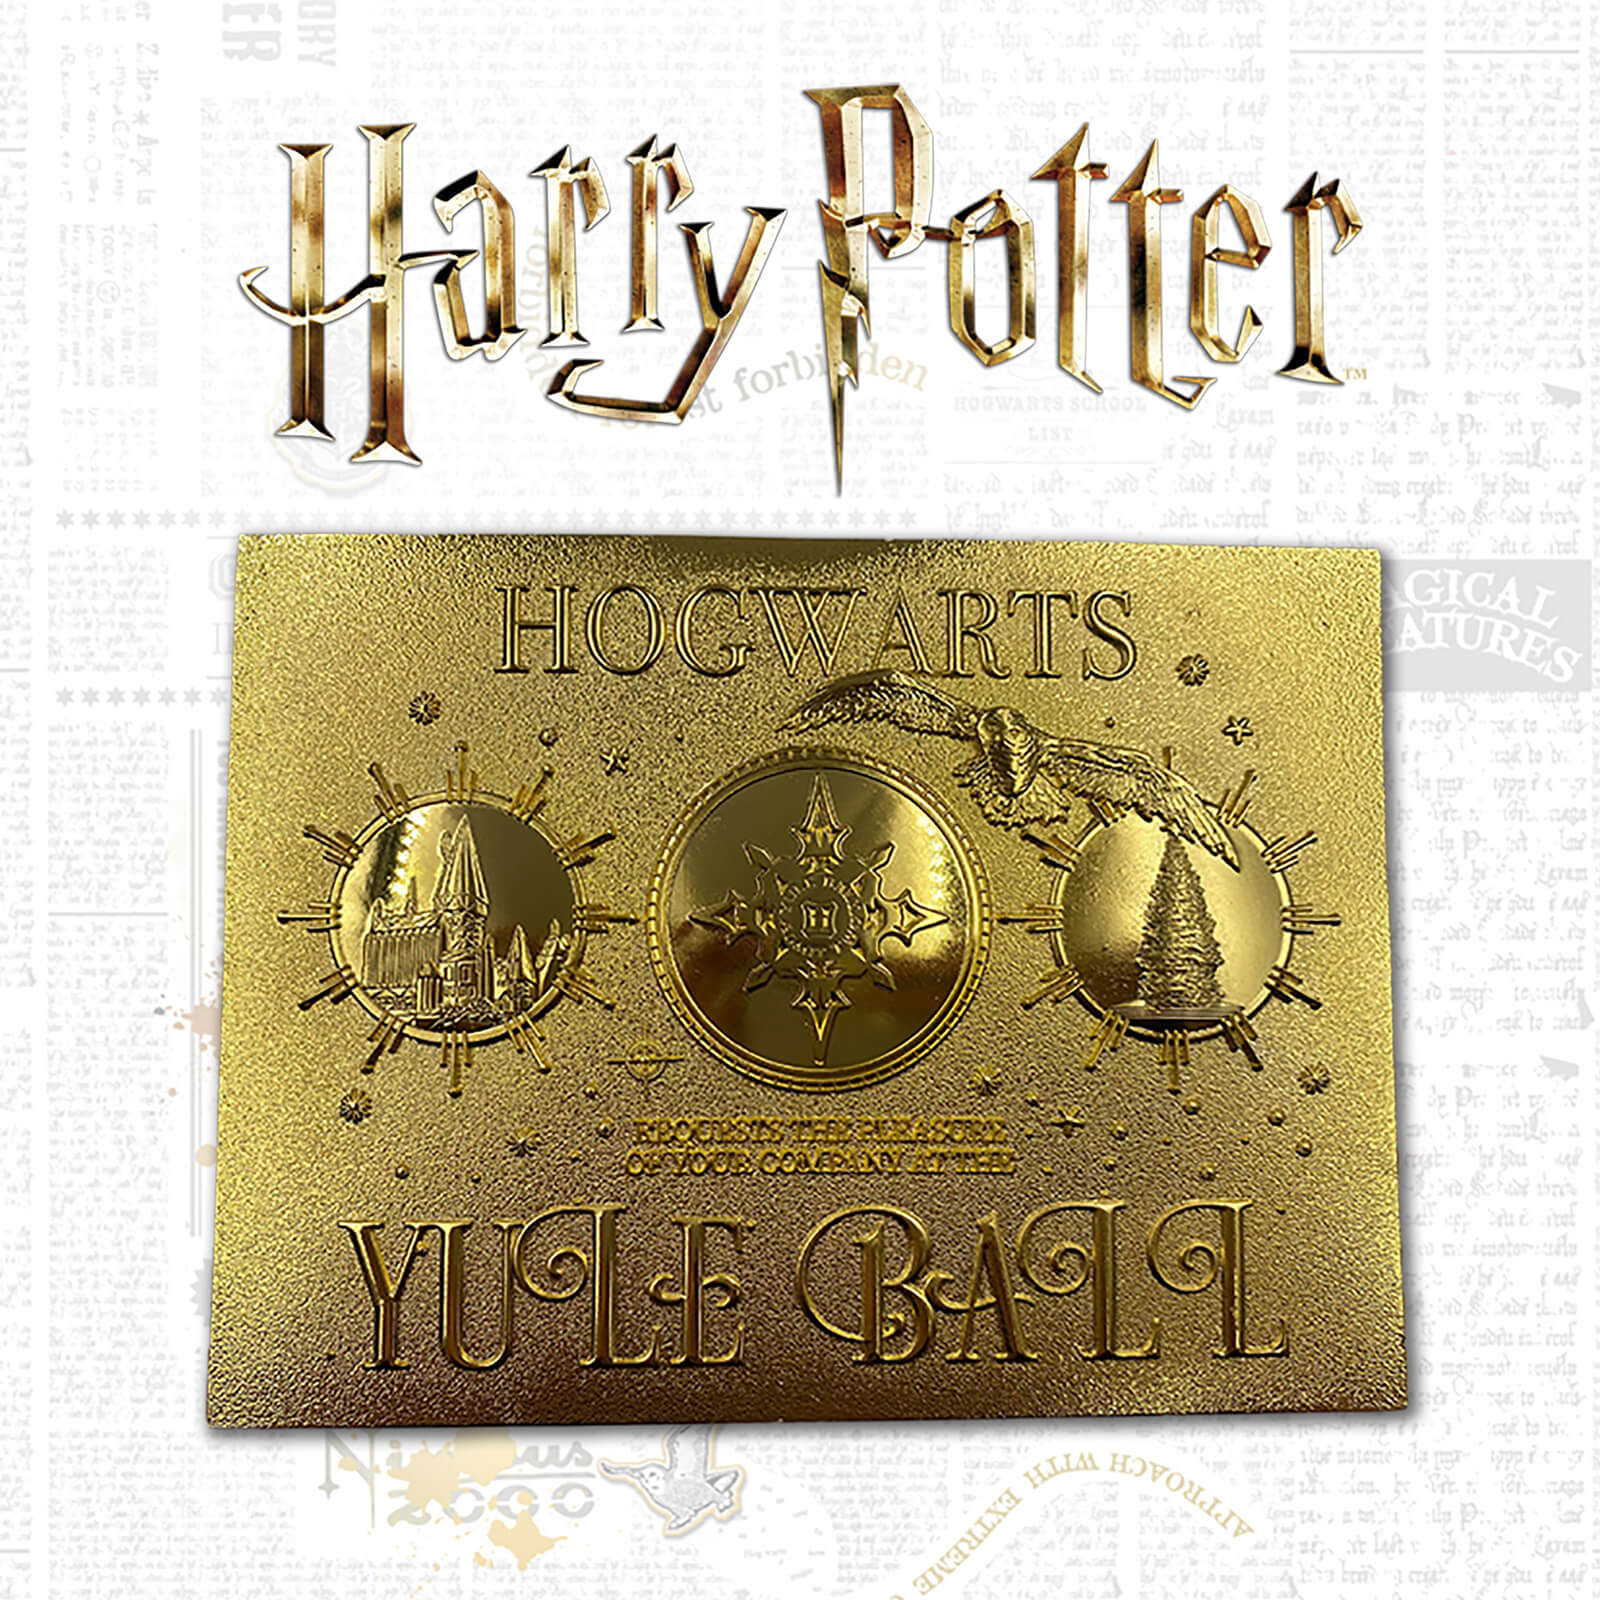 Image of Harry Potter 24K Gold Plated Yule Ball Ticket Limited Edition Replica - Zavvi Exclusive